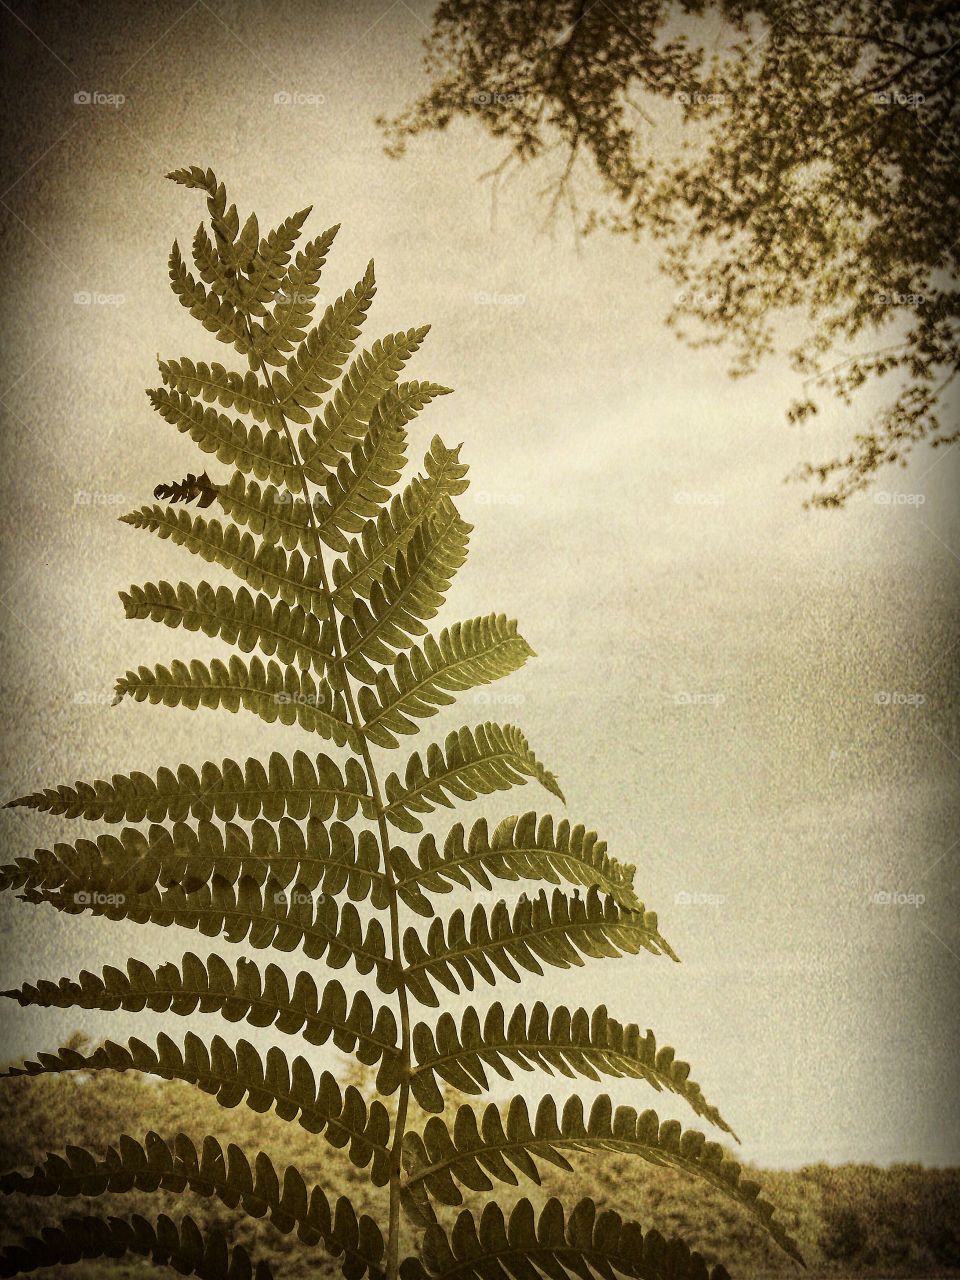 The Fern by the Pond